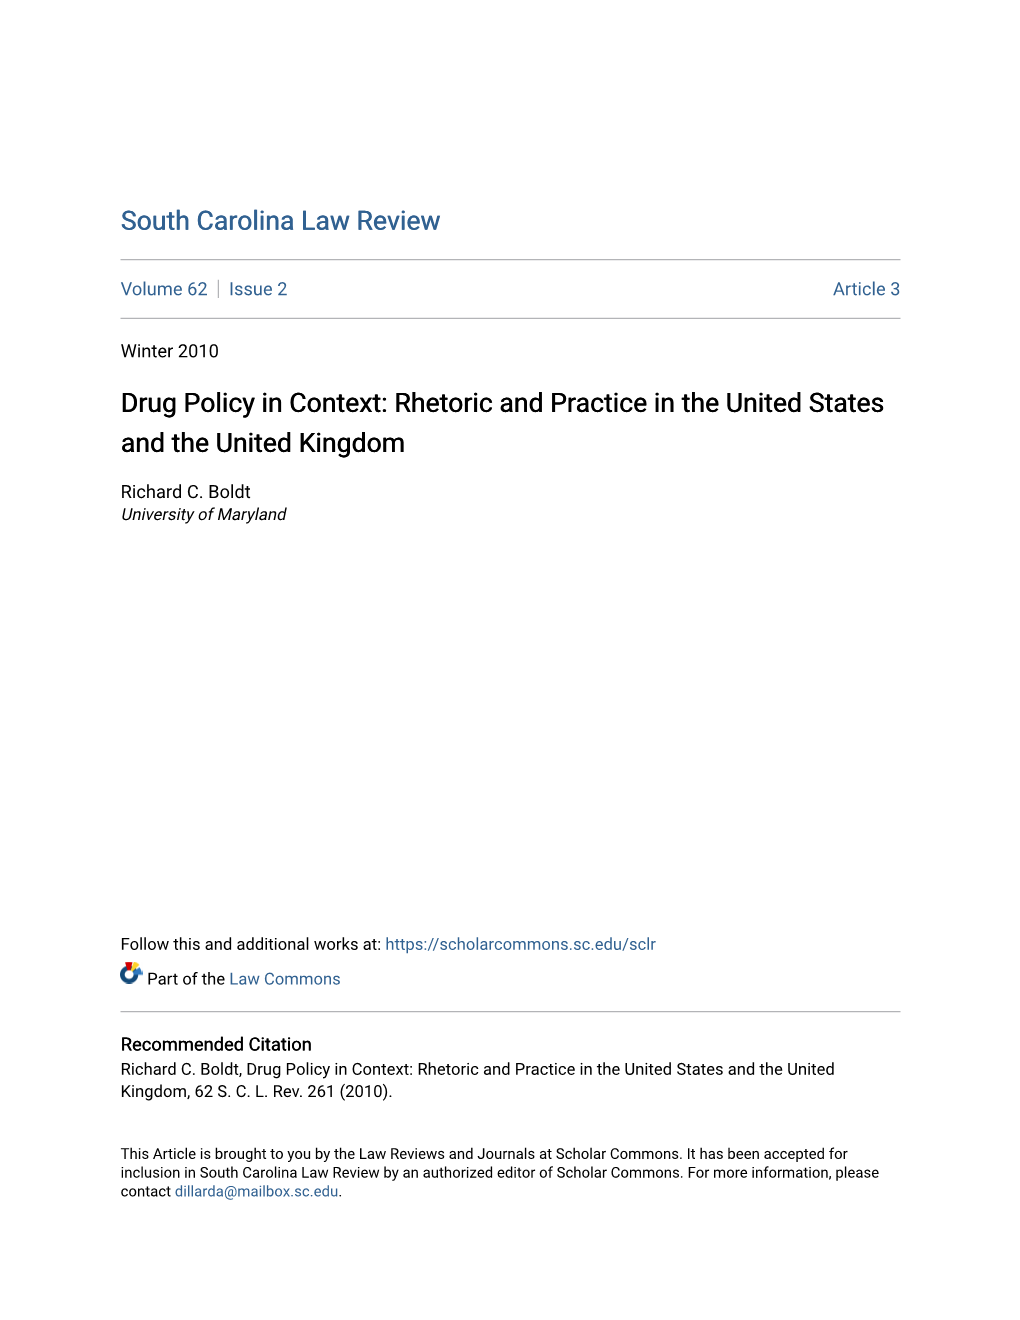 Drug Policy in Context: Rhetoric and Practice in the United States and the United Kingdom